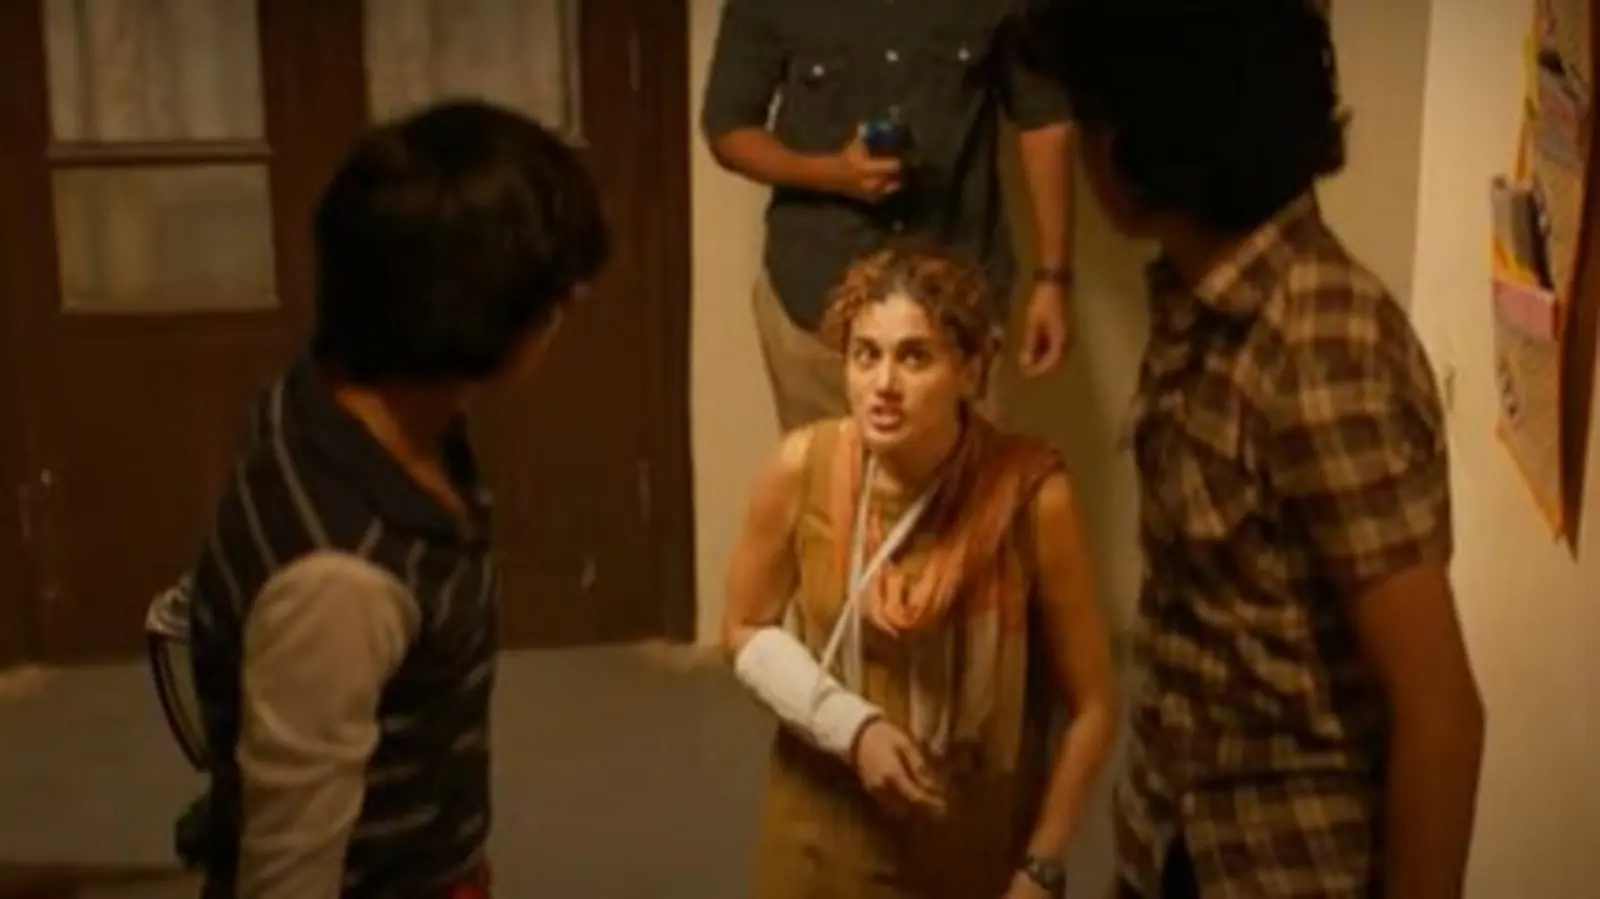 Mishan Impossible trailer: Taapsee Pannu calls it ‘sweetest trailer of smallest’ film. Watch